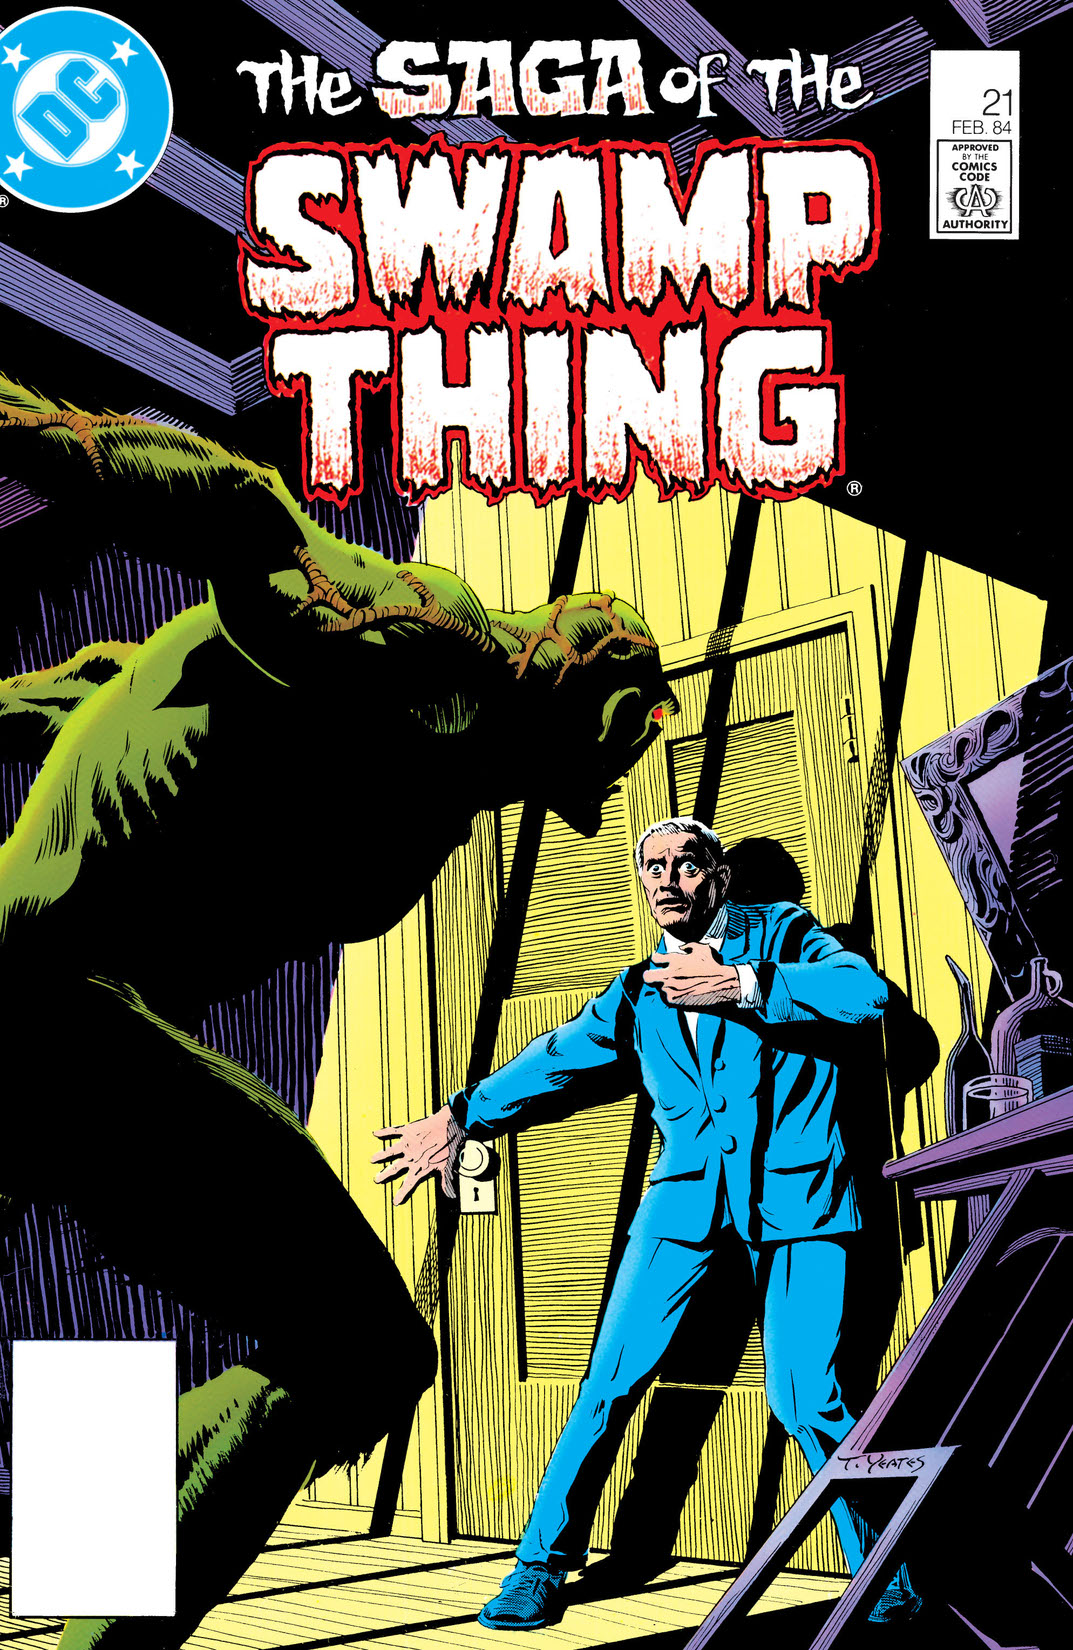 The Saga of the Swamp Thing (1982-) #21 preview images